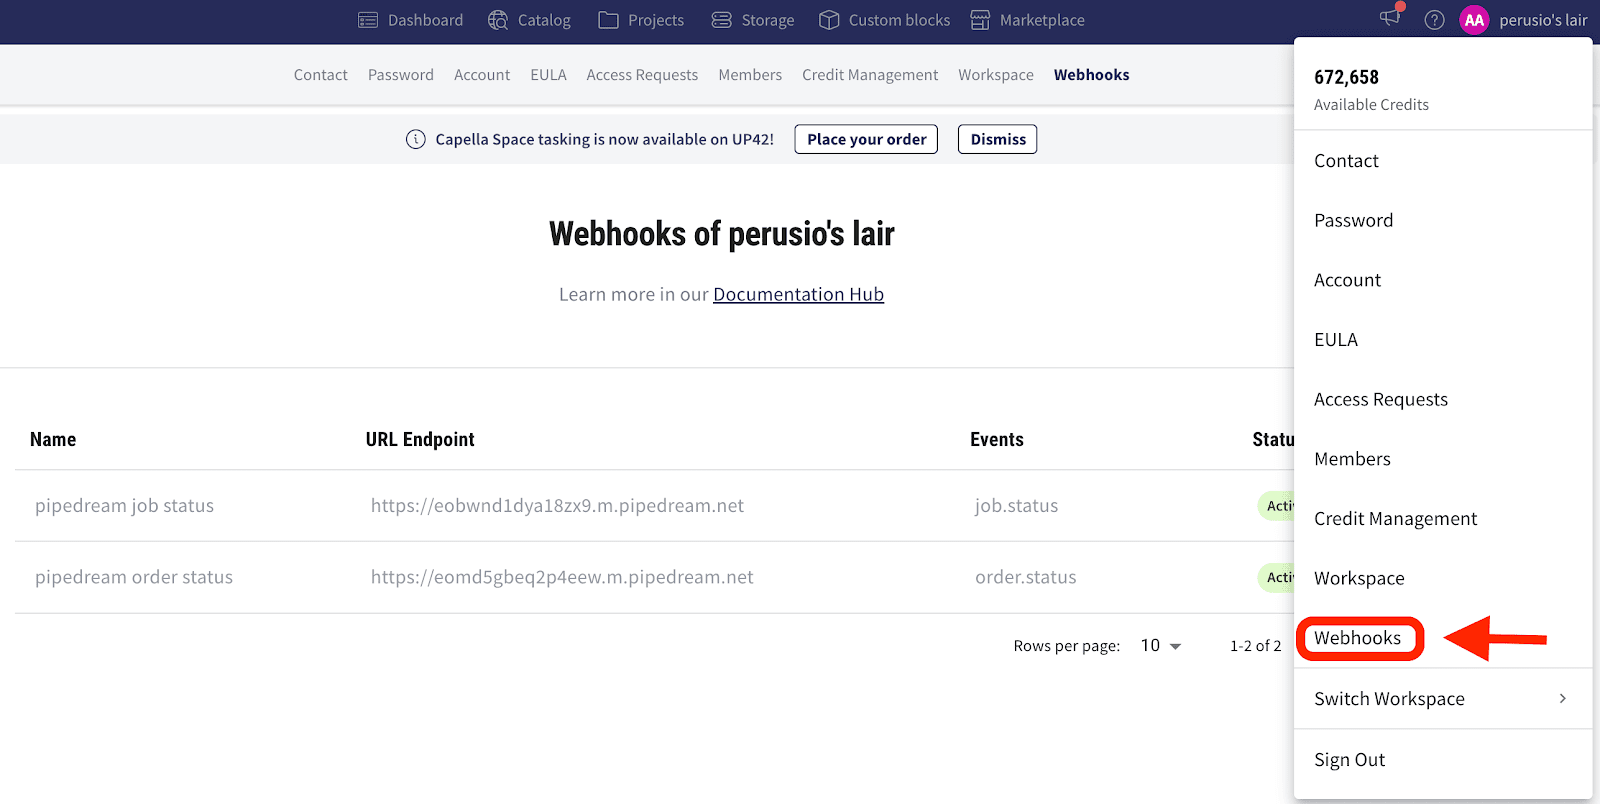 Accessing the webhooks tab in the
console